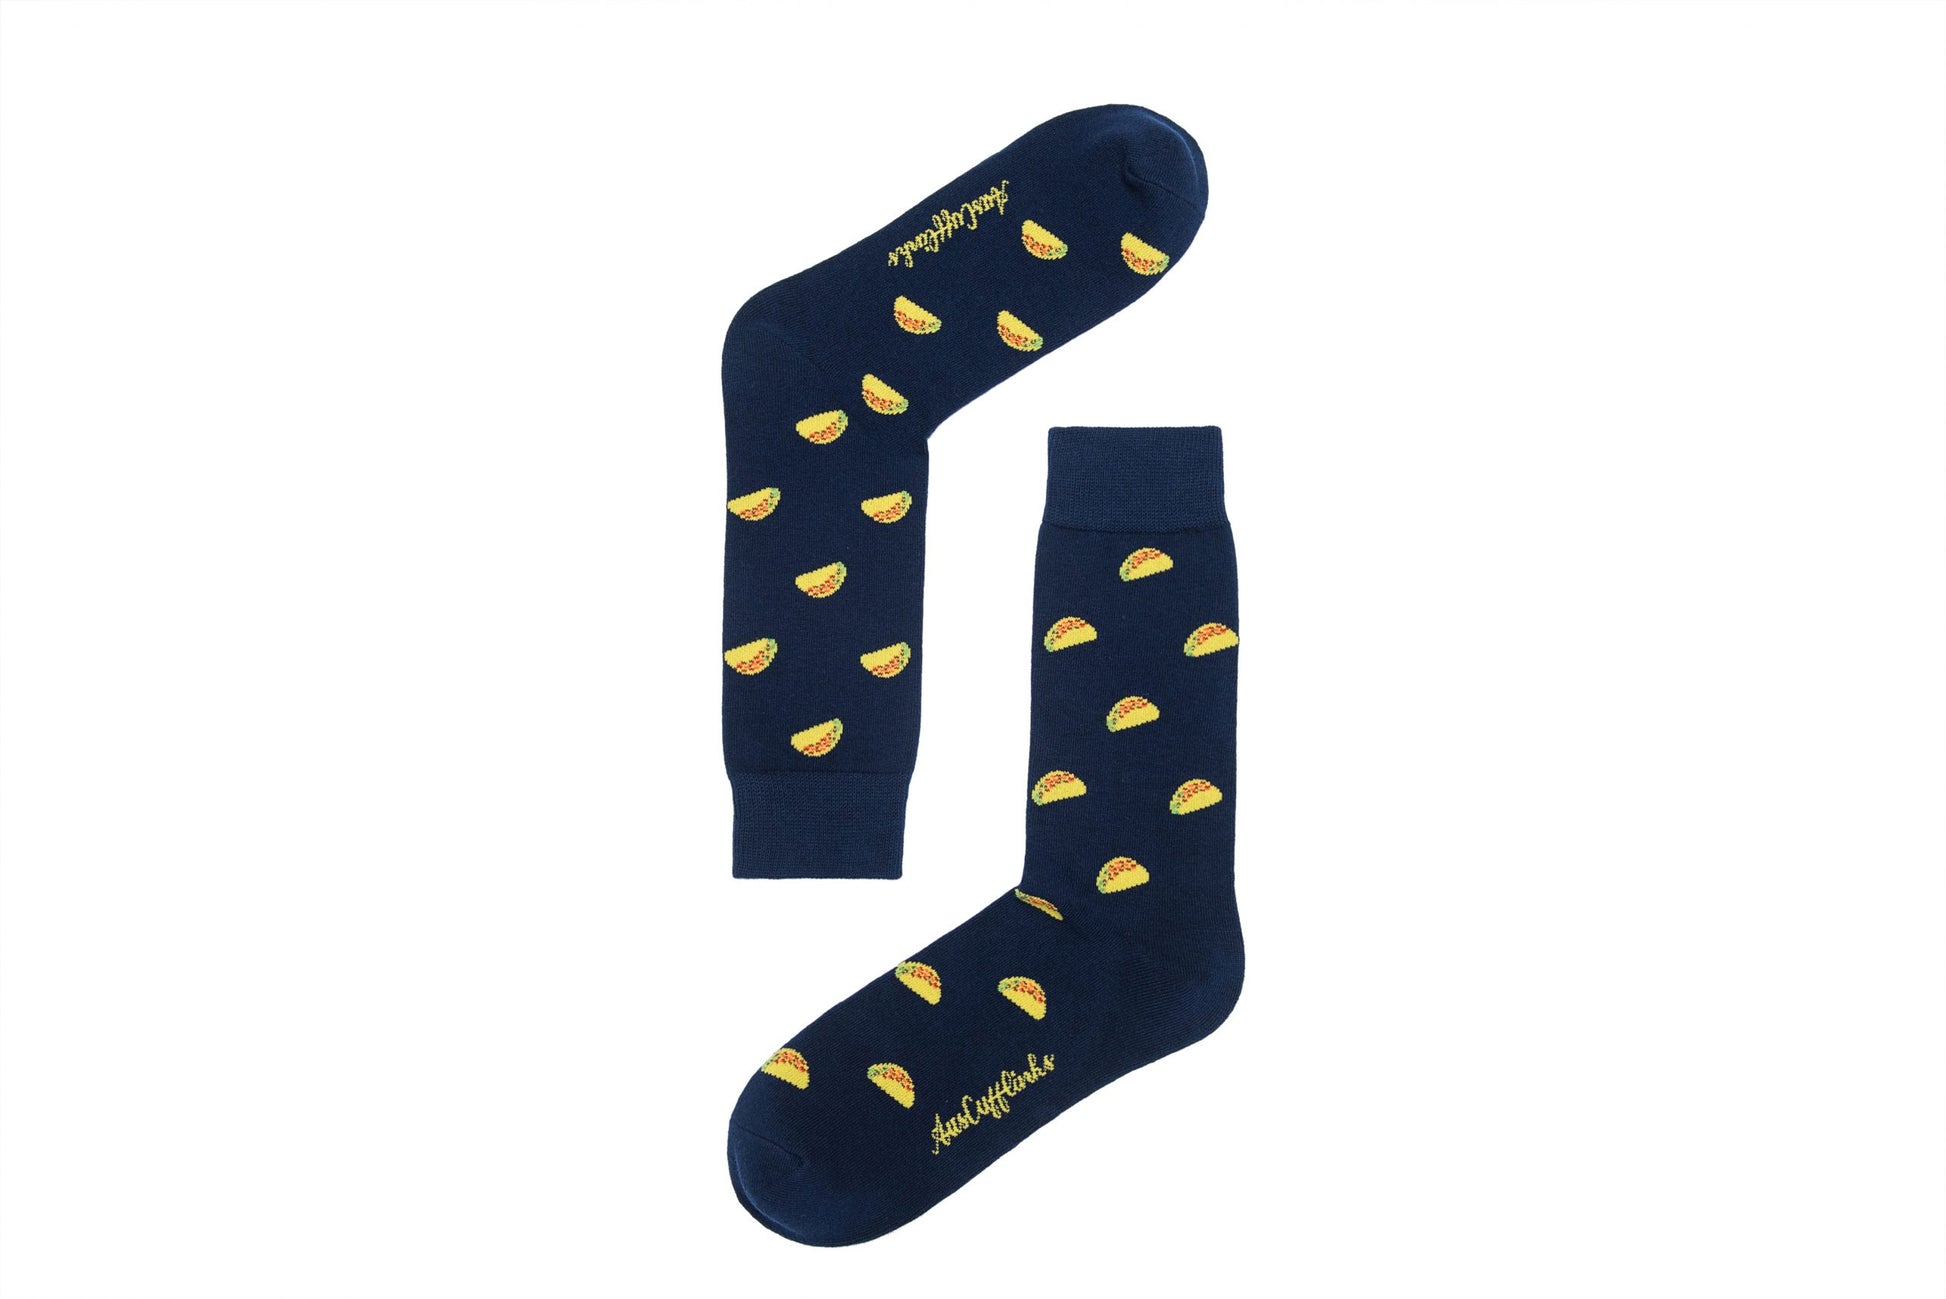 A pair of dark blue, flavor-packed Taco Socks with a taco pattern against a white background, exuding playfulness.